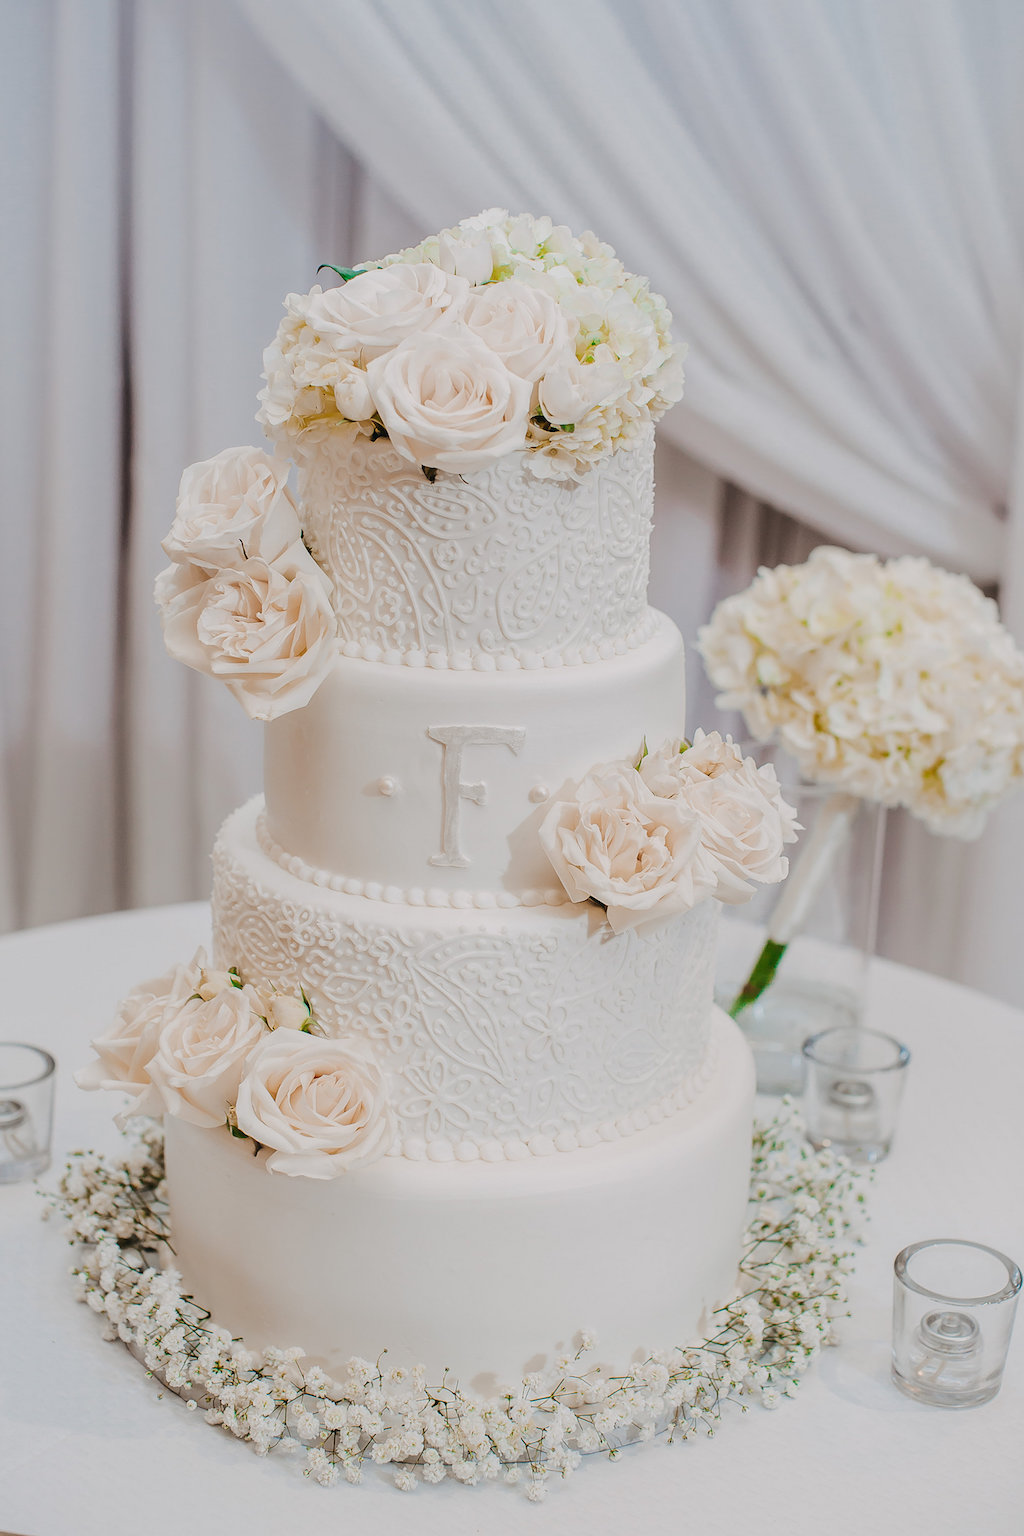 Four Tier Round White Wedding Cake with Initial and Floral Icing, Blush Roses, and White Floral Cake Stand